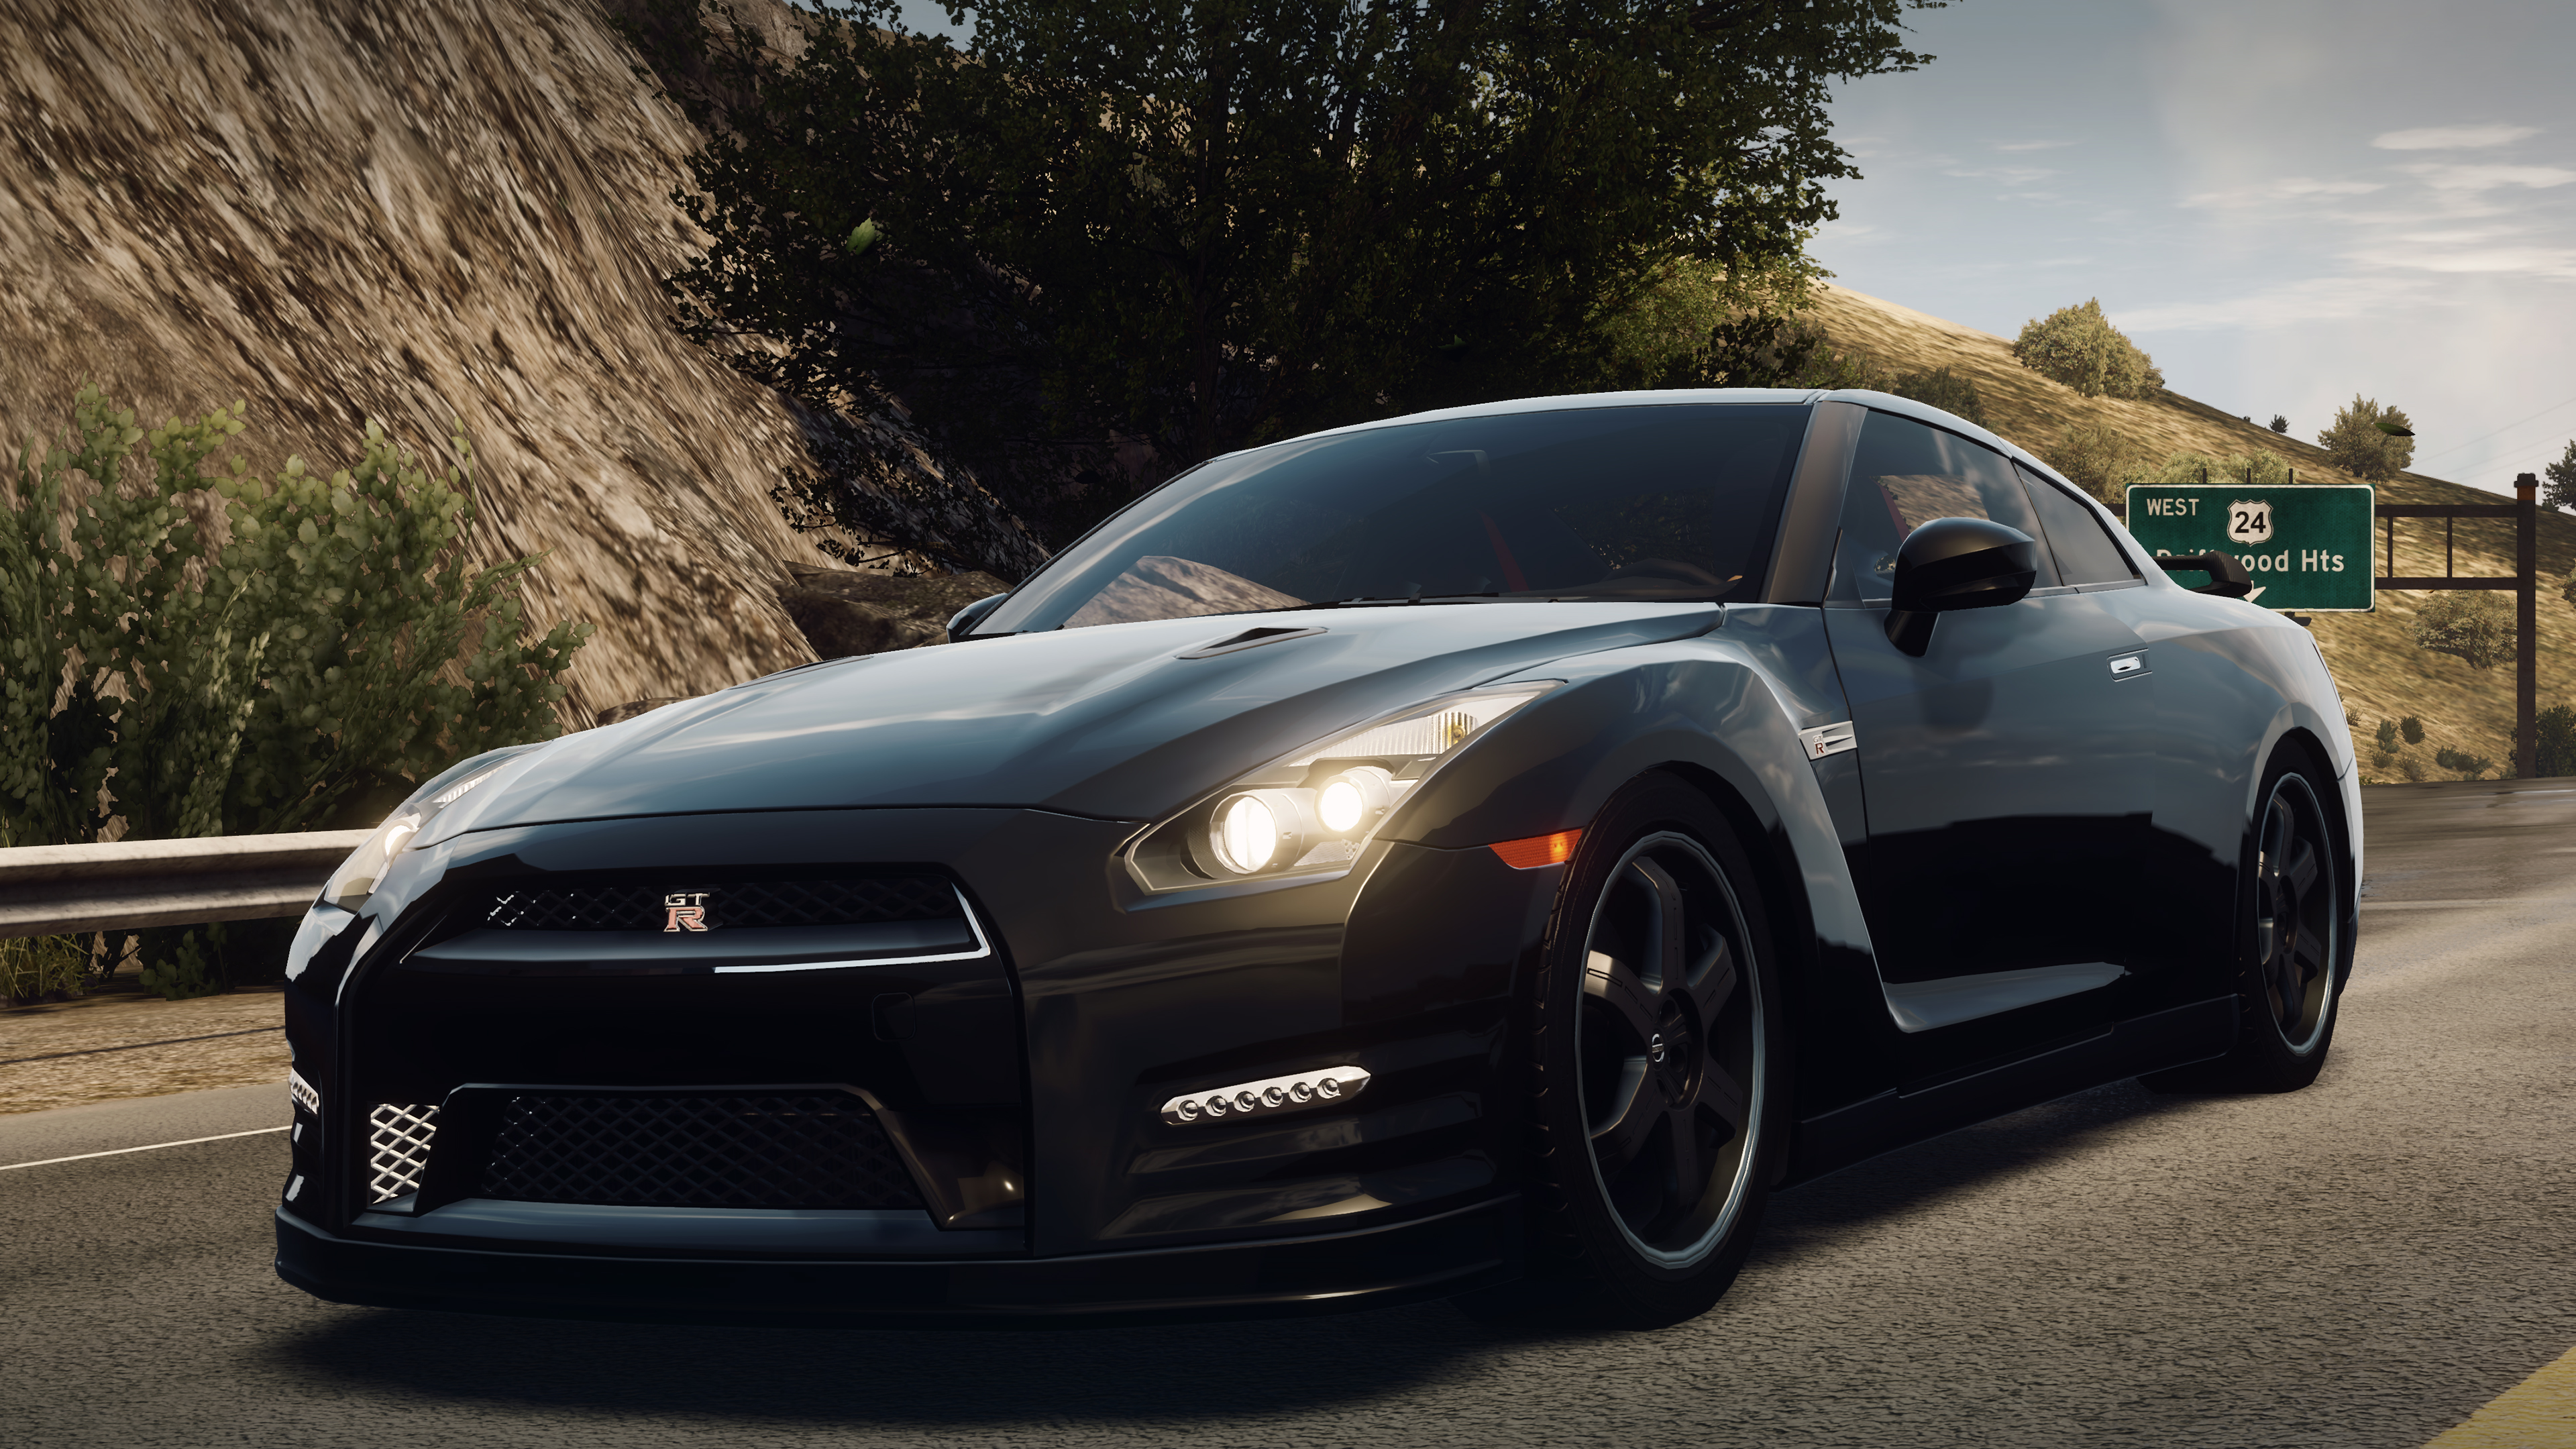  Is This The 2017 R36 Nissan GT-R?